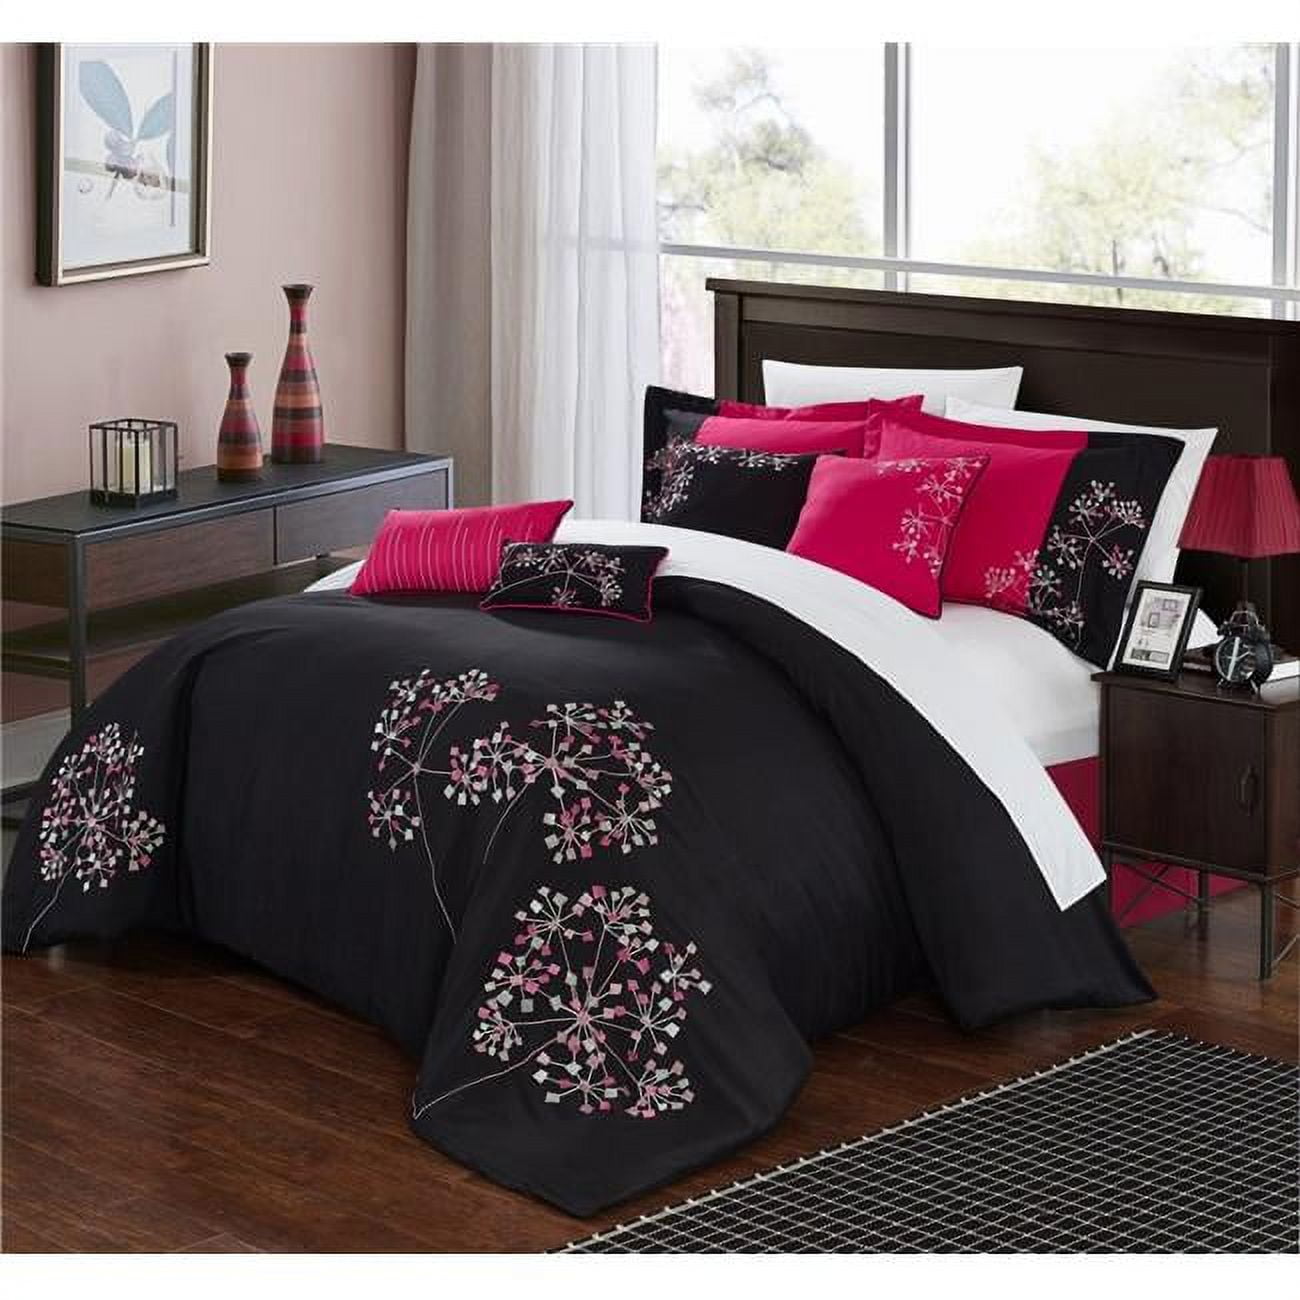 33-91-k-12-us Sydney Bed In A Bag Embroidered Comforter Set With 4 Piece Sheets - King - 12 Piece